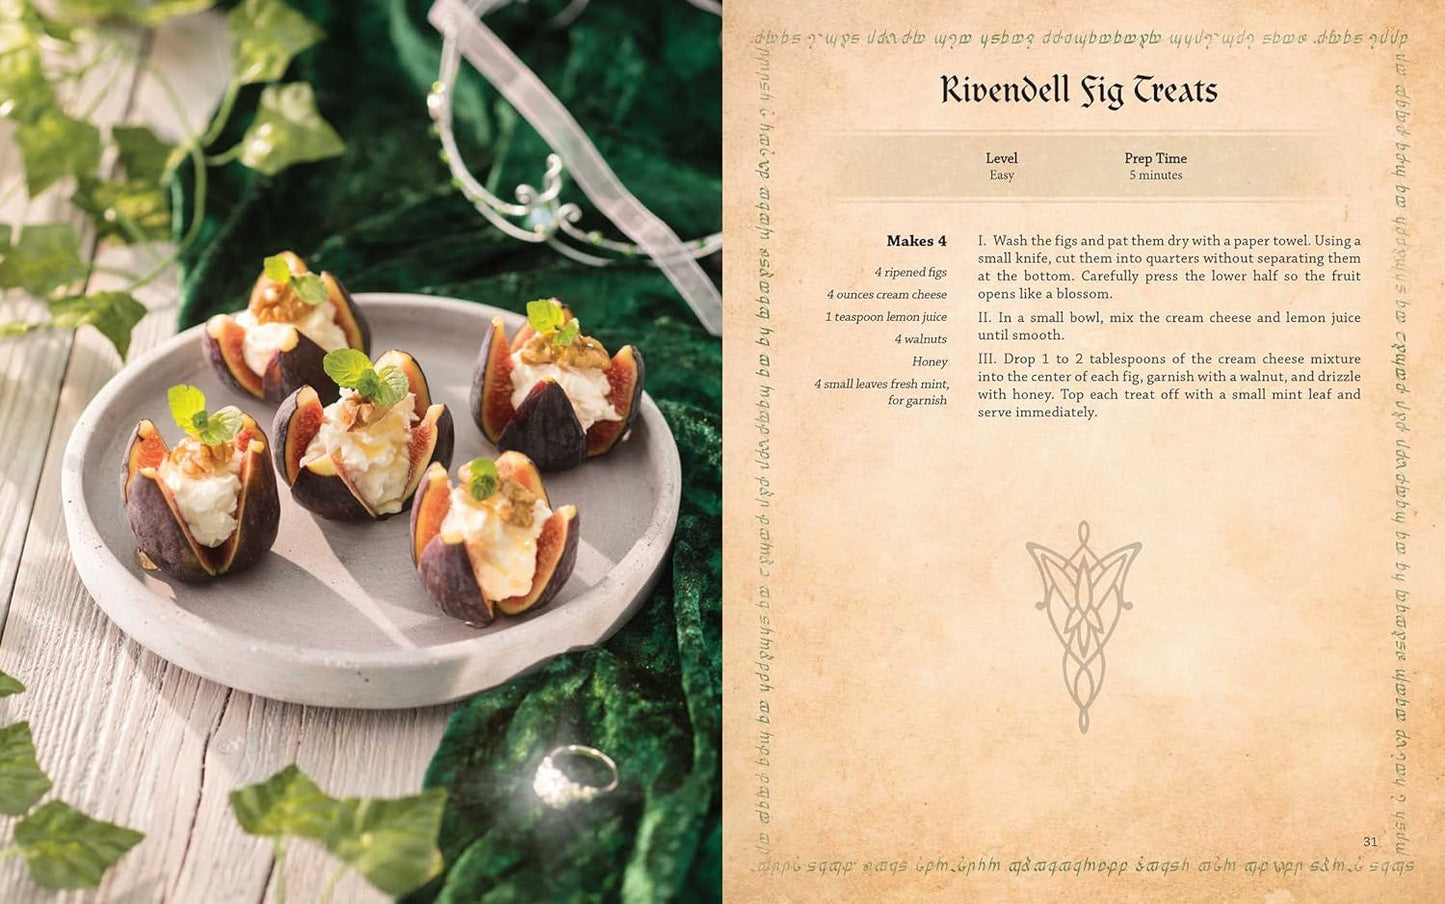 A two-page spread from the book. On the left is a white stone plate, on a wood table surrounded by green leaves and a green cloak. On the plate are five figs, filled with cream cheese and walnuts. On the right is a parchment-colored page, with a recipe for "Rivendell Fig Treats" in black text.